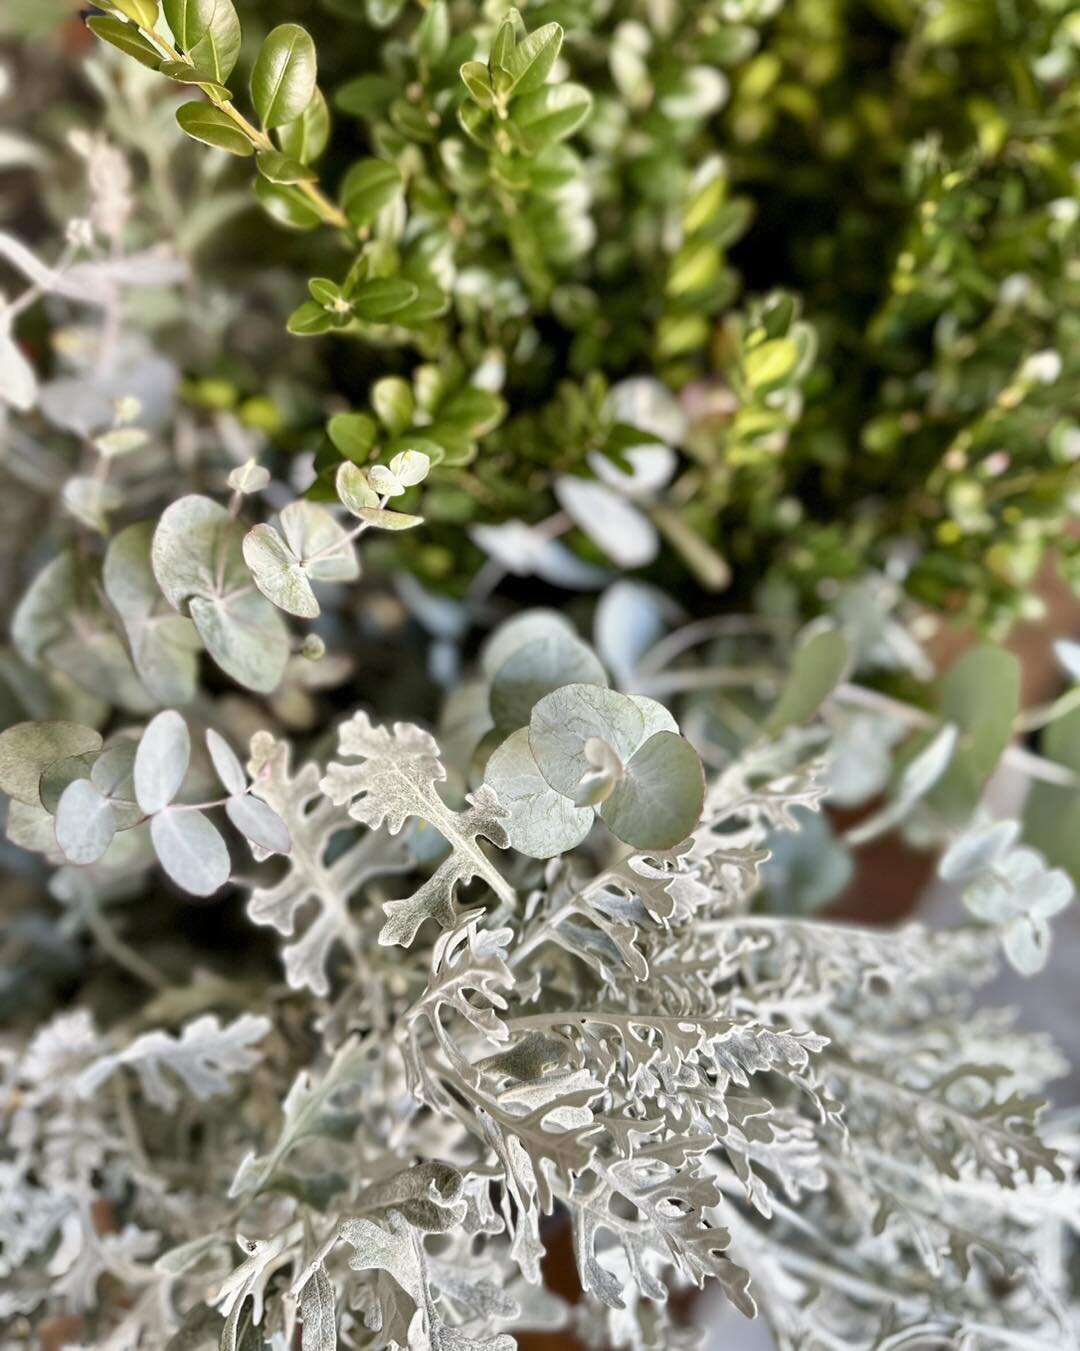 Bunches of eucalyptus, soft evergreens (privet), and dusty miller for the market tomorrow! I love that mix at Christmas, both color and texture. Also colorful dried flower gold ring wreaths. Beautiful all year long. See you there!  #croftonfarmersmar